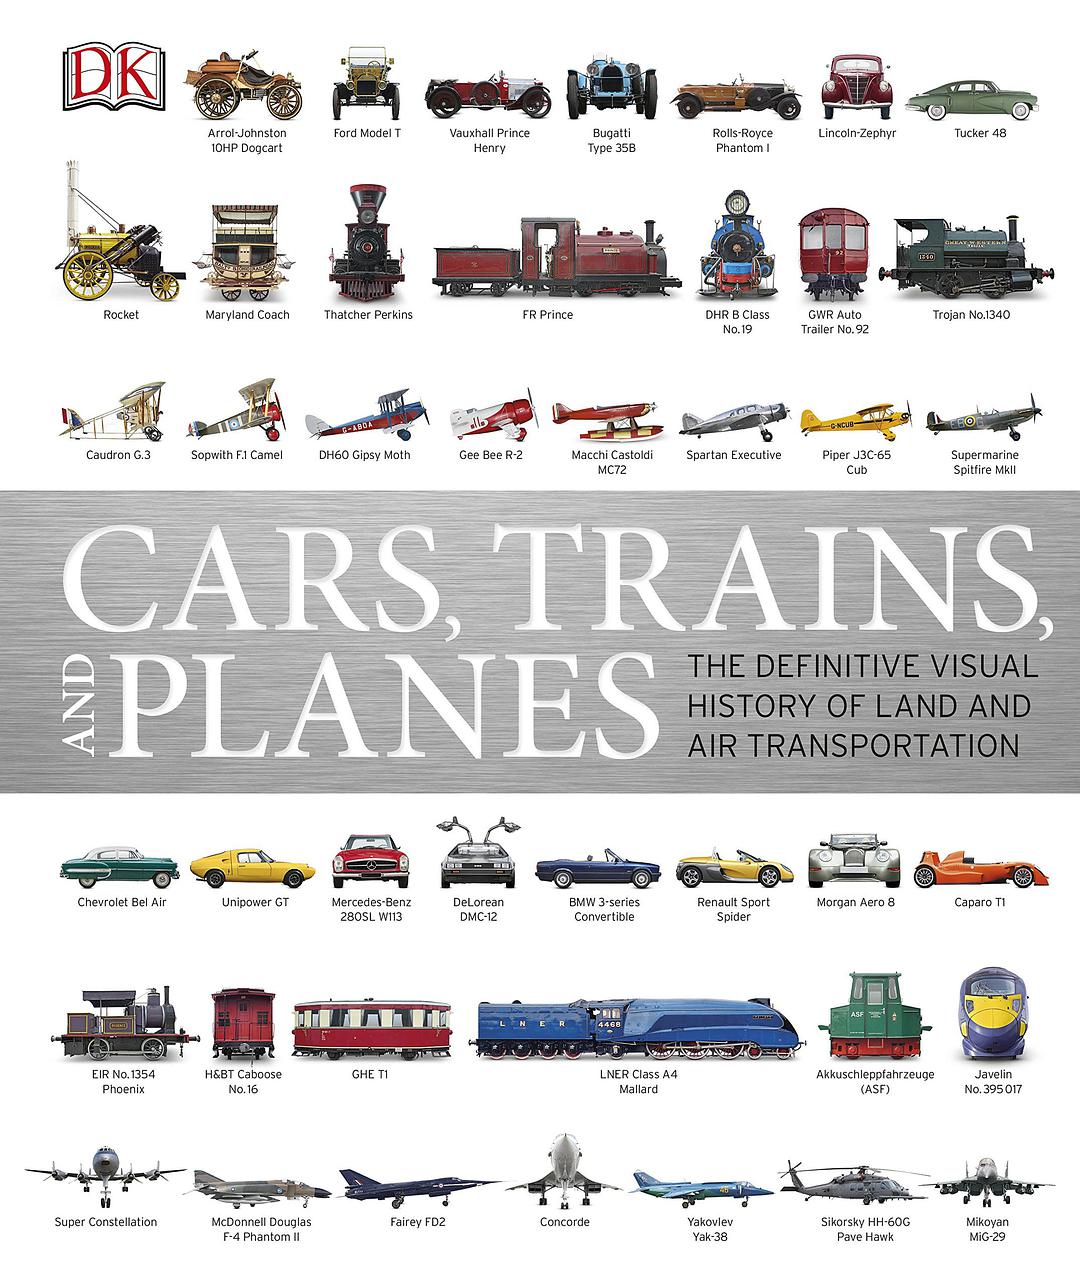 Cars, trains and planes : the definitive visual history of land and air transportation.